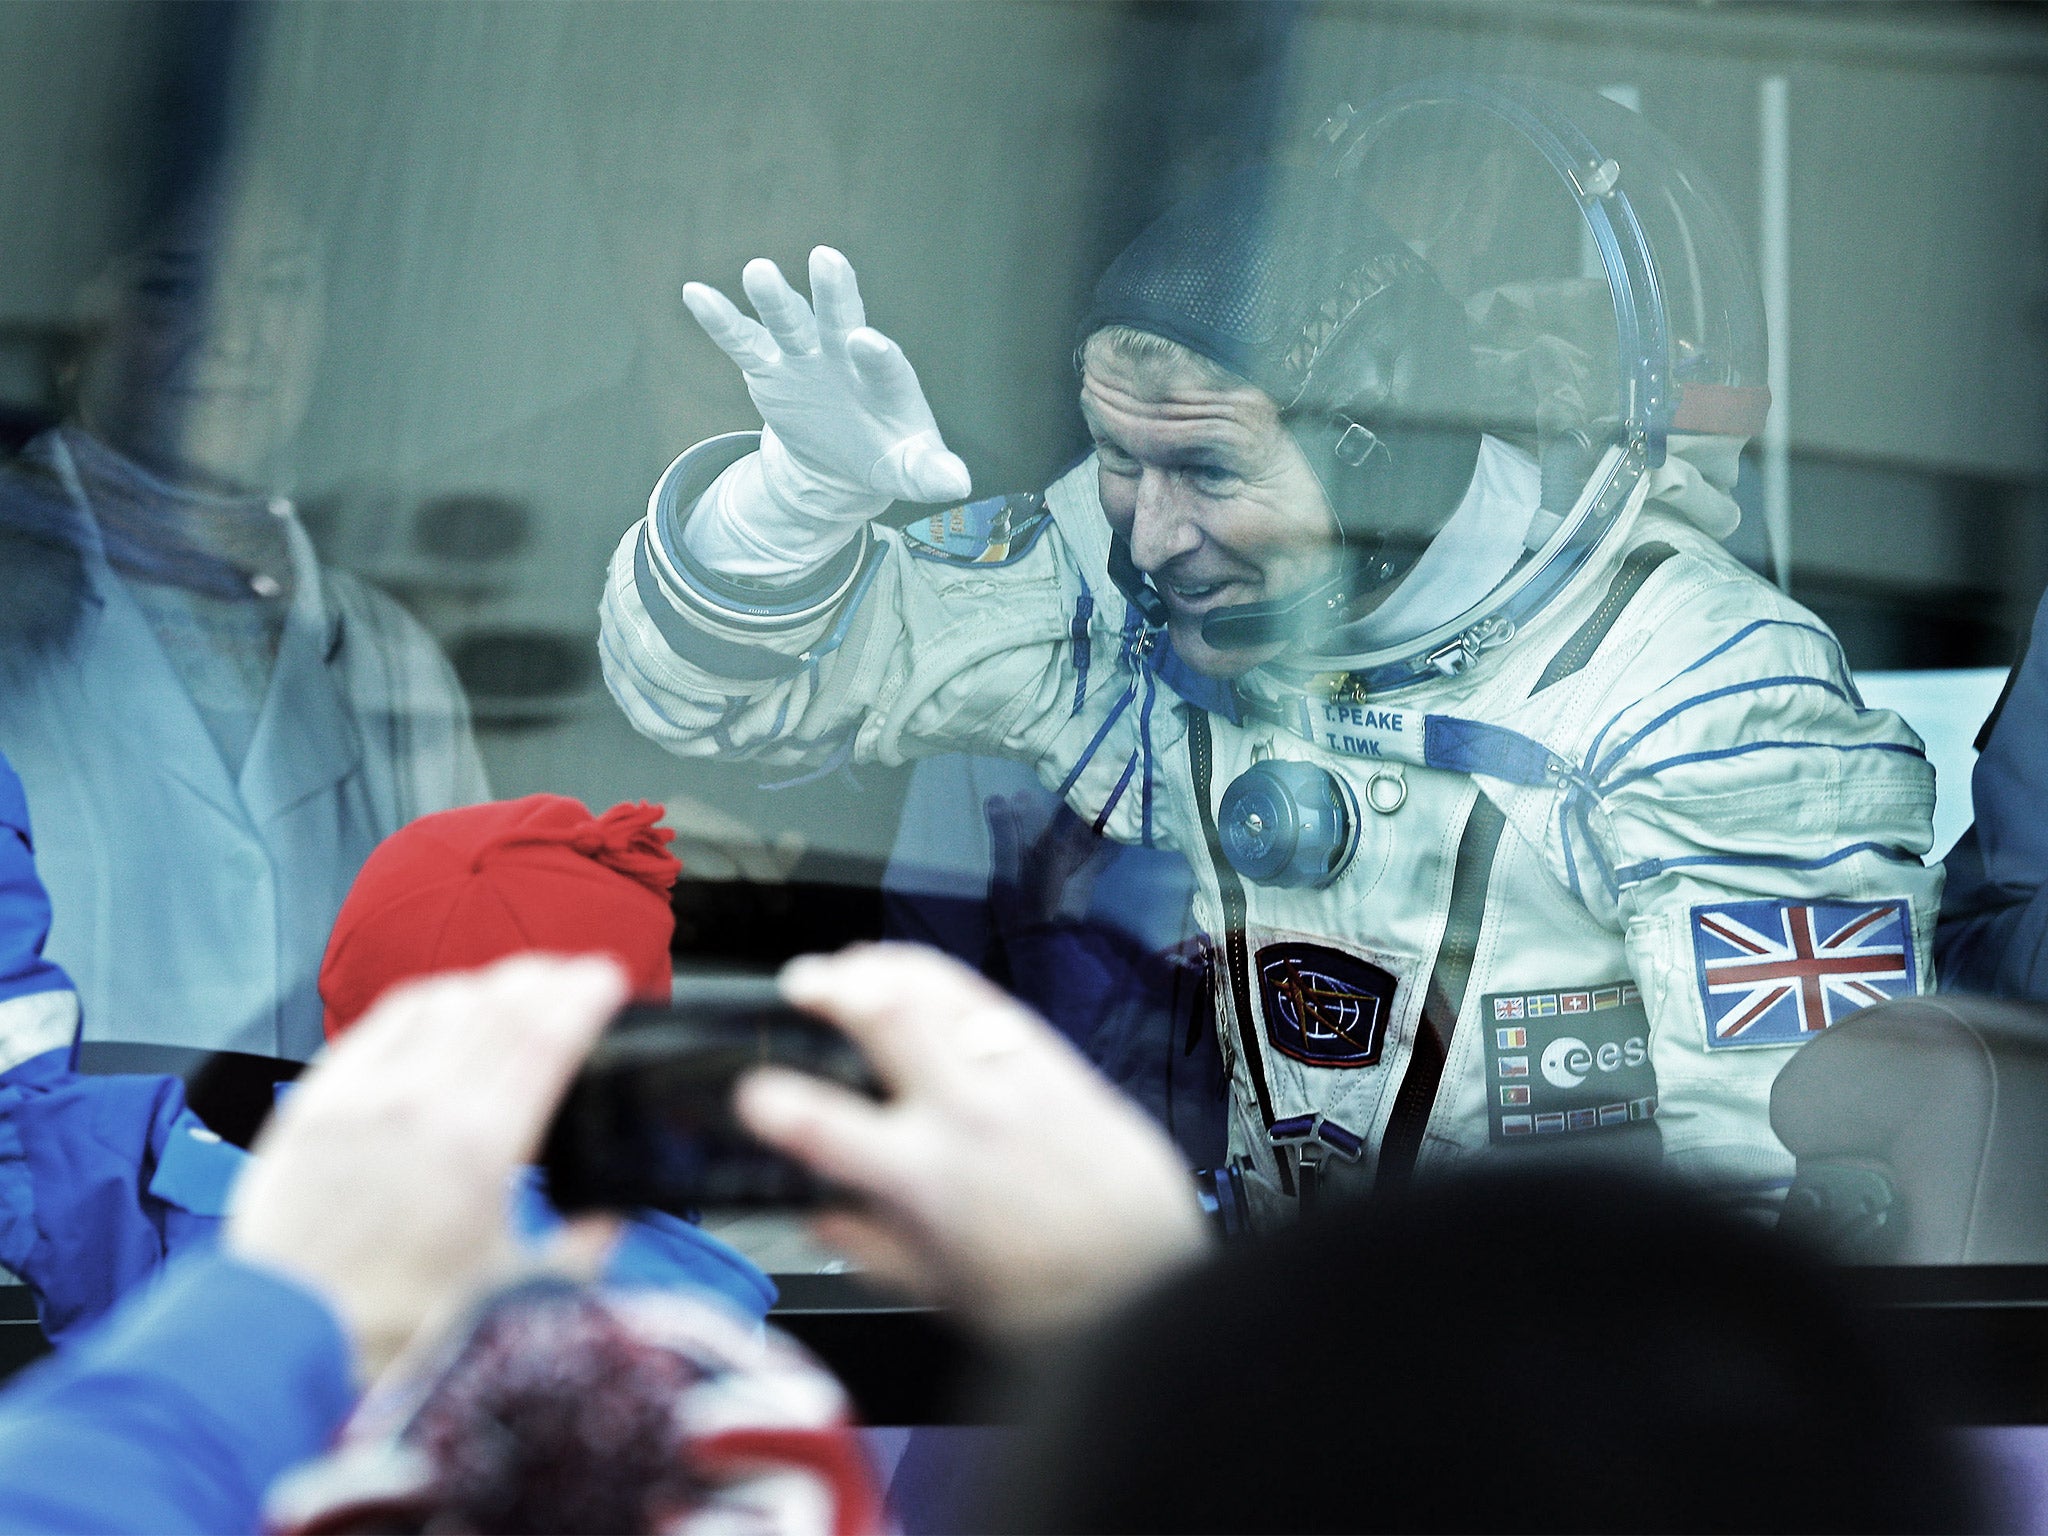 British astronaut Tim Peake waves to his sons shortly before lift-off